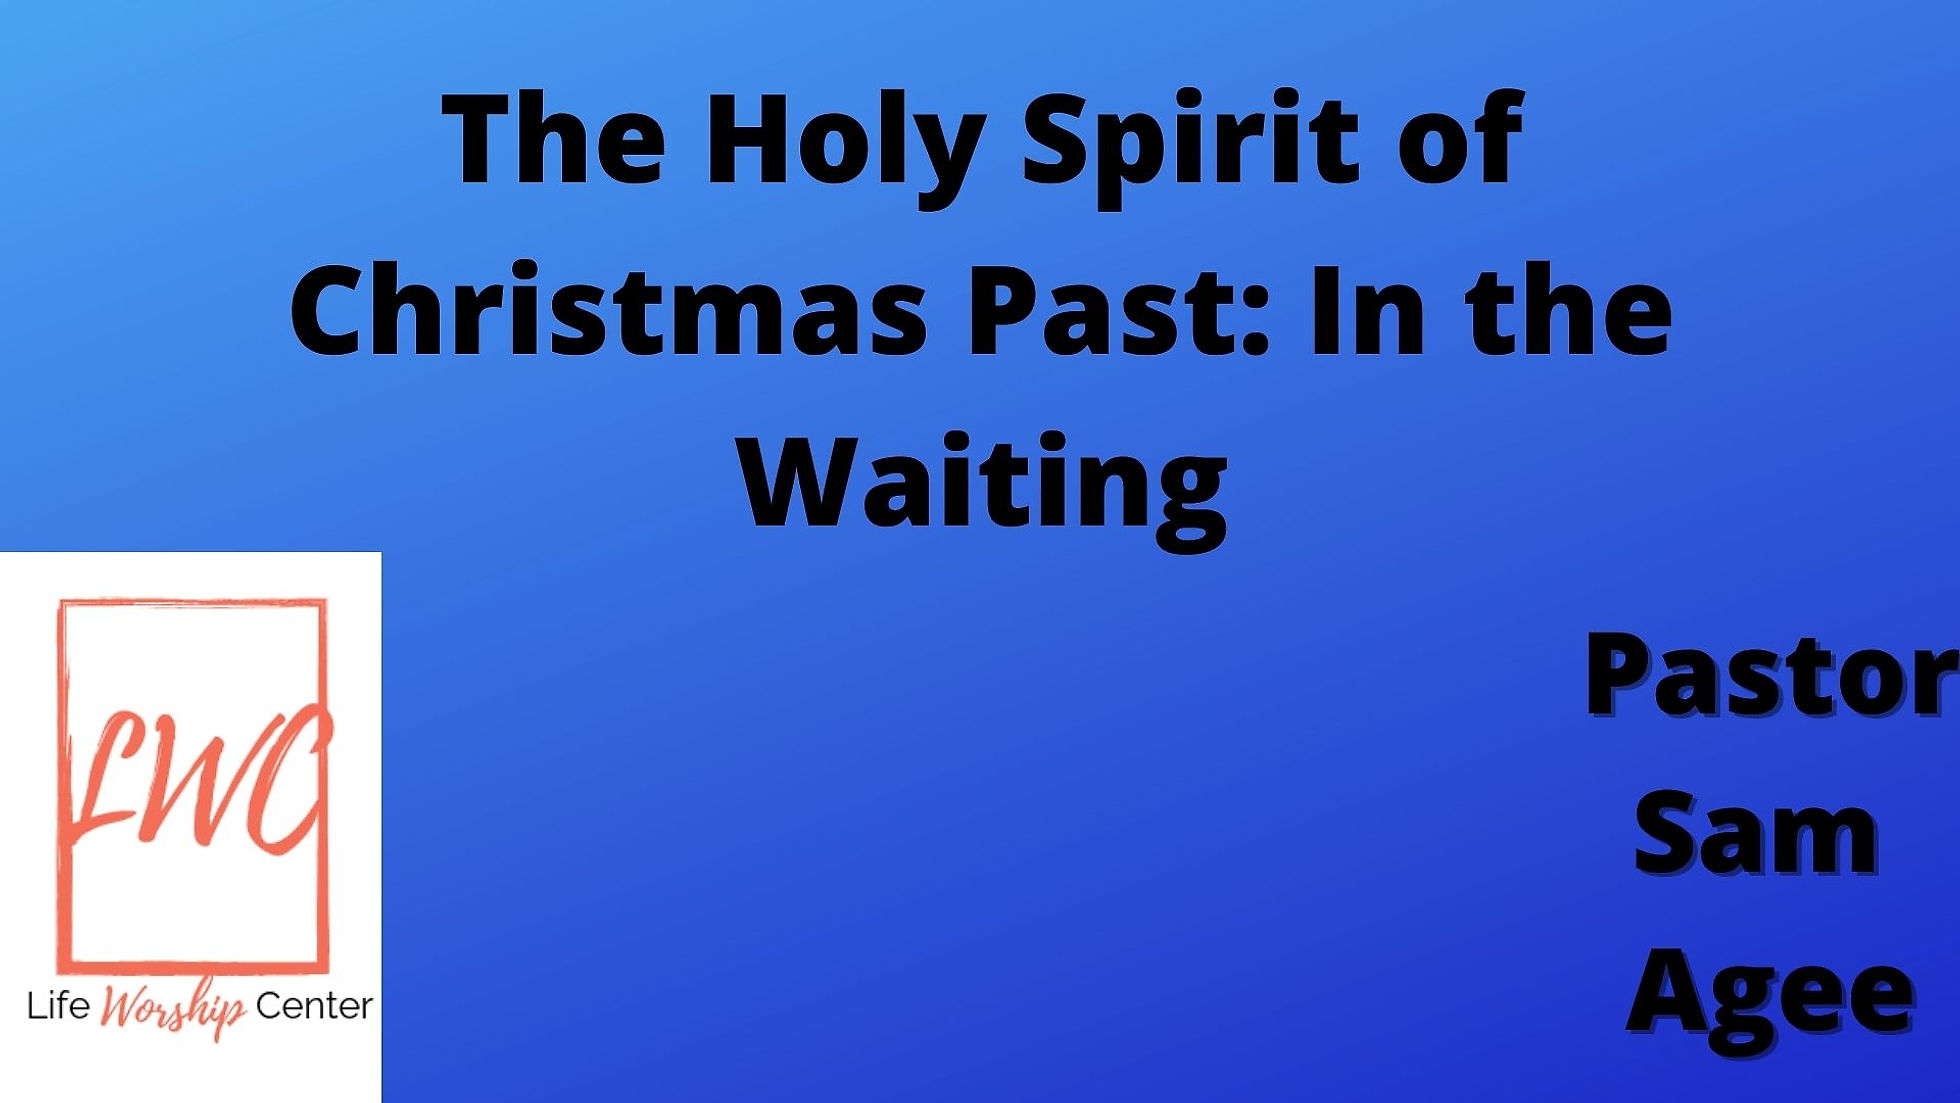 The Holy Spirit of Christmas Past: In the Waiting